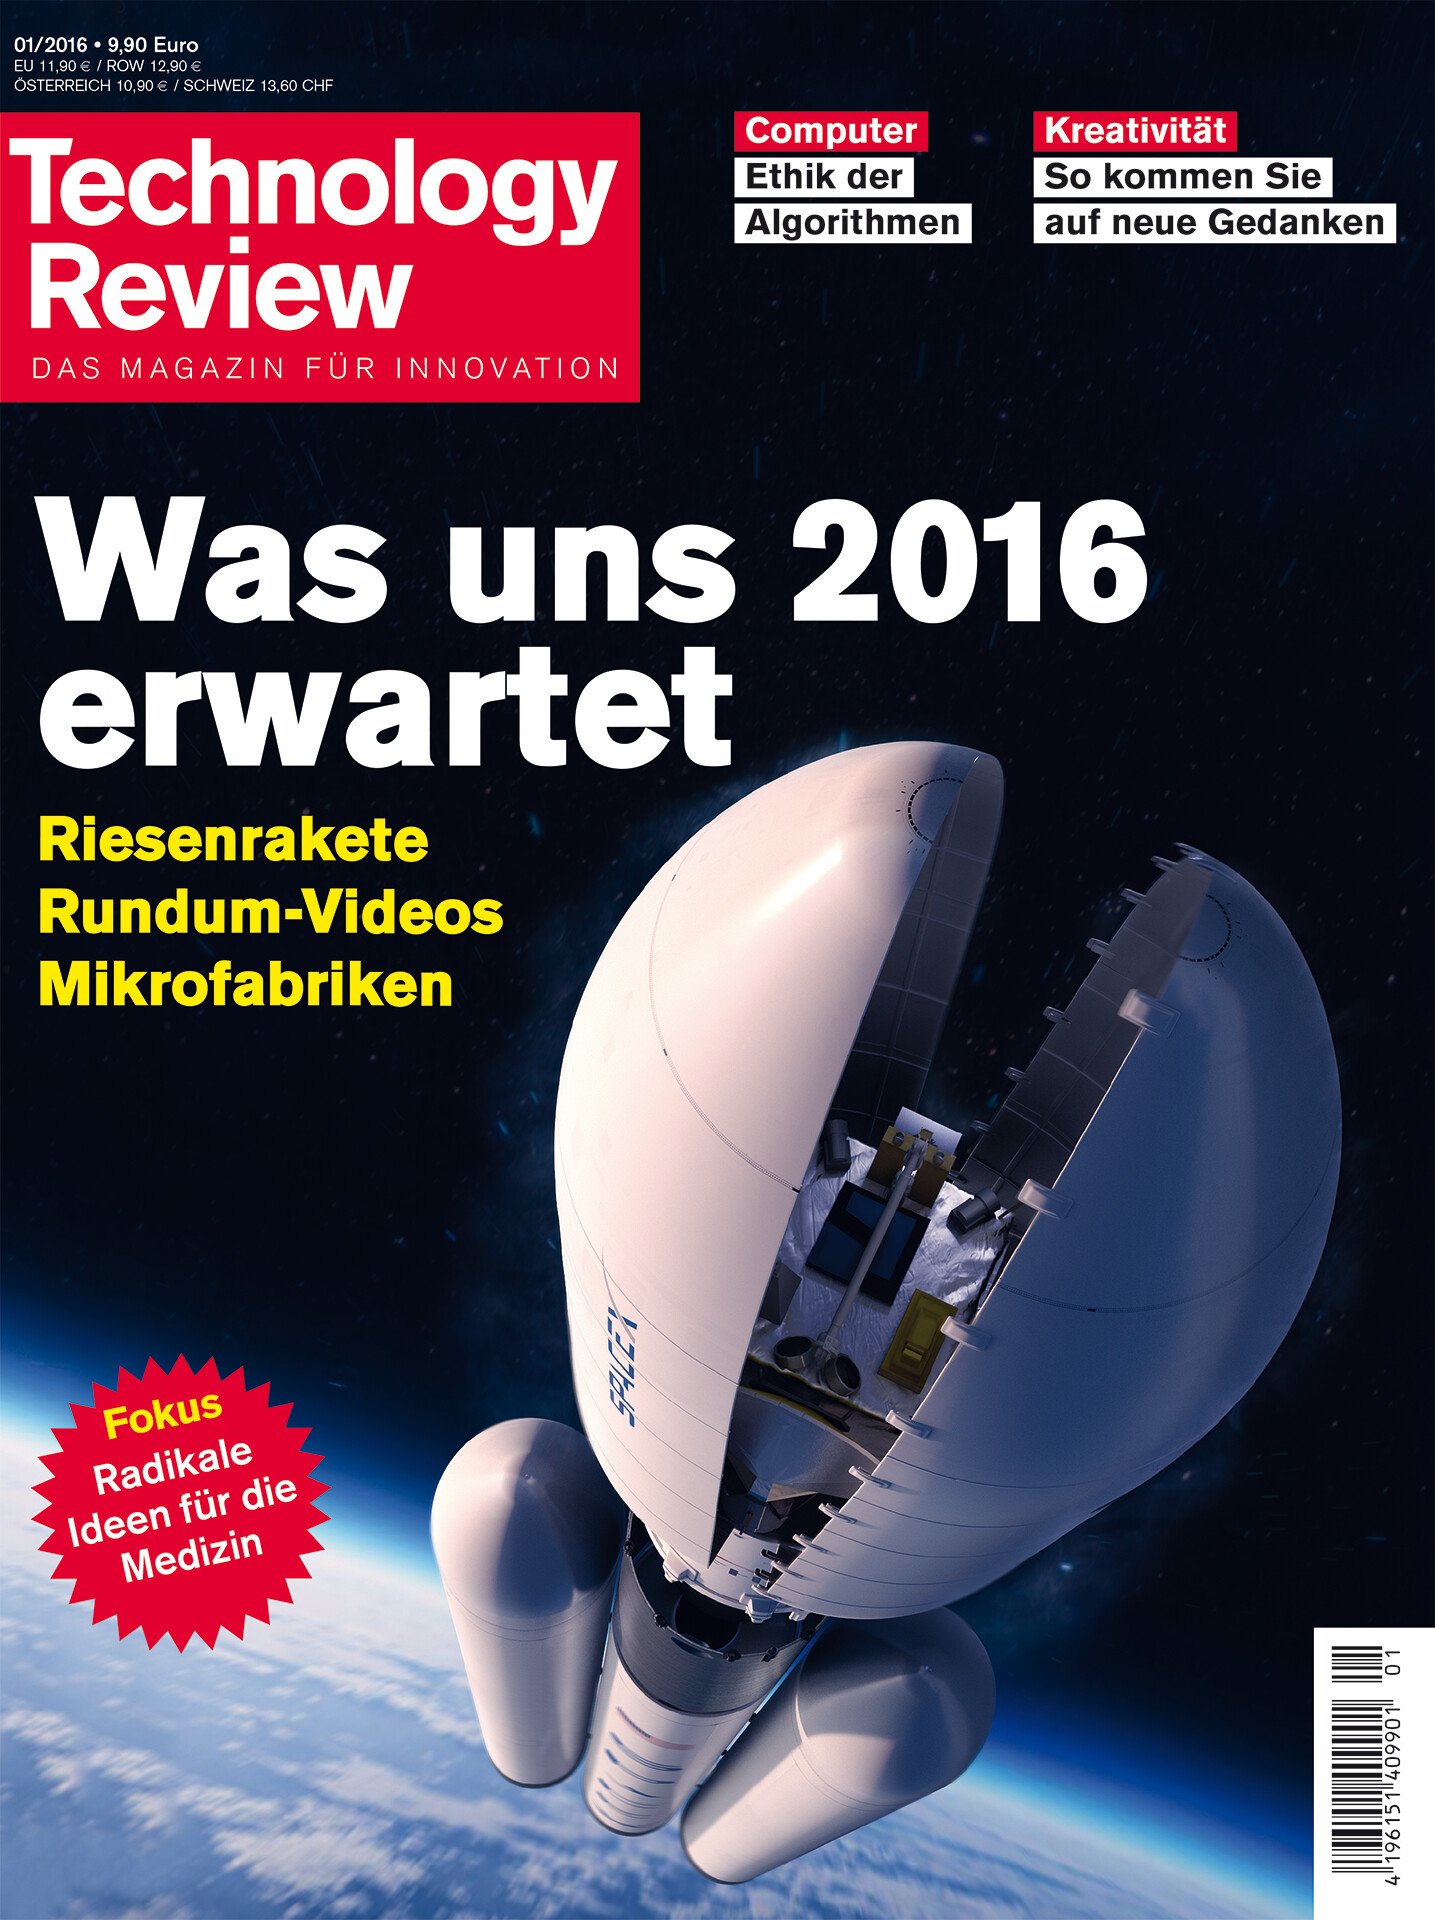 Technology Review 01/2016